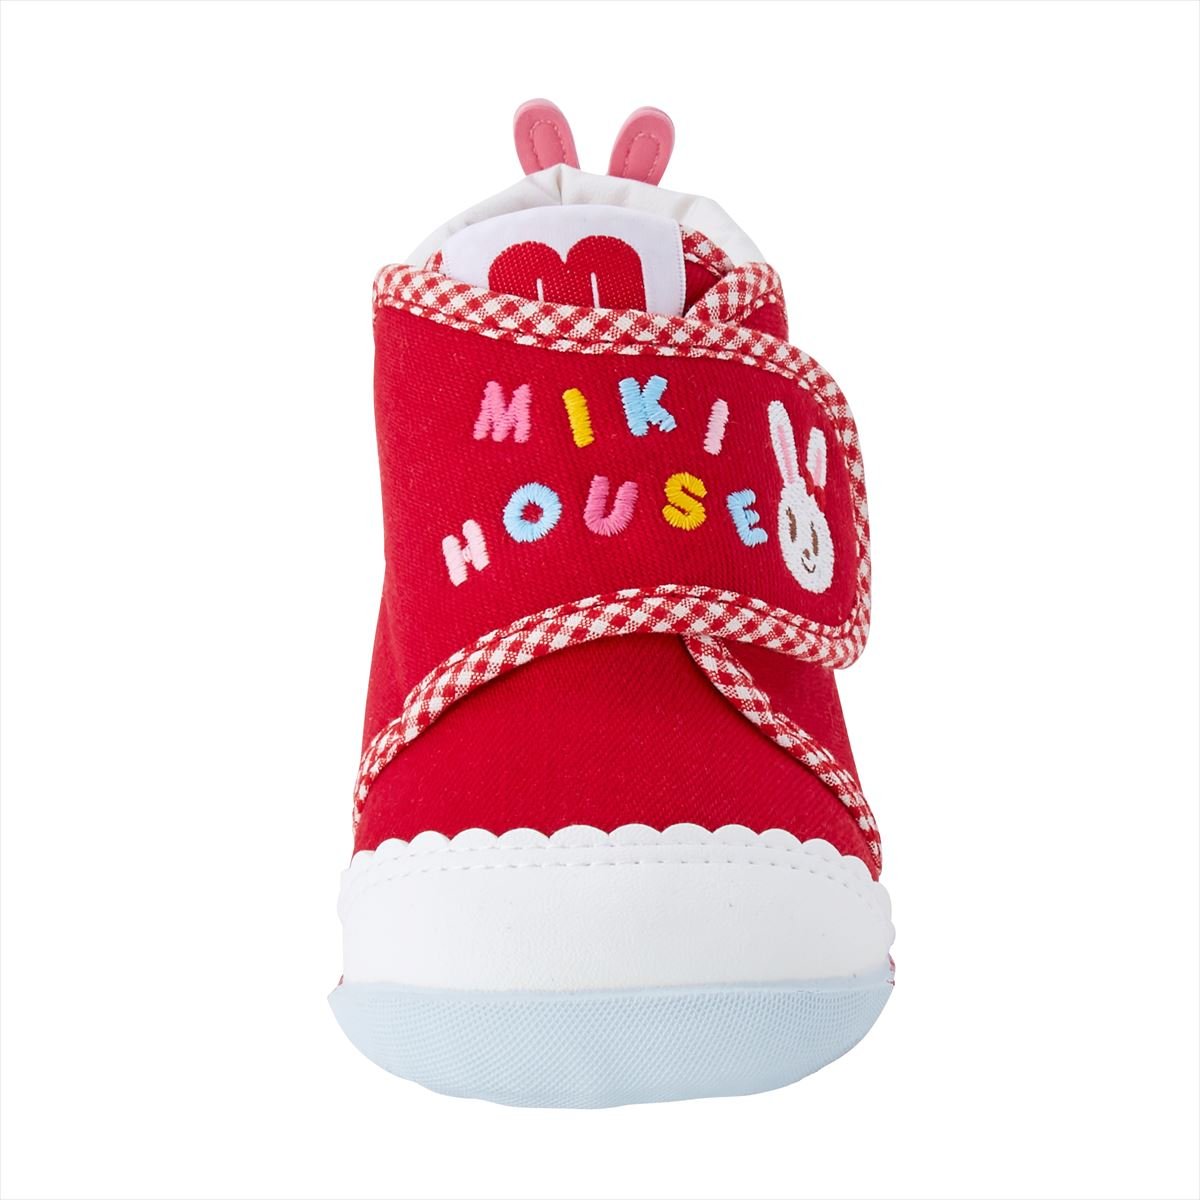 Bunny Denim First Walker Shoes - MIKI HOUSE USA